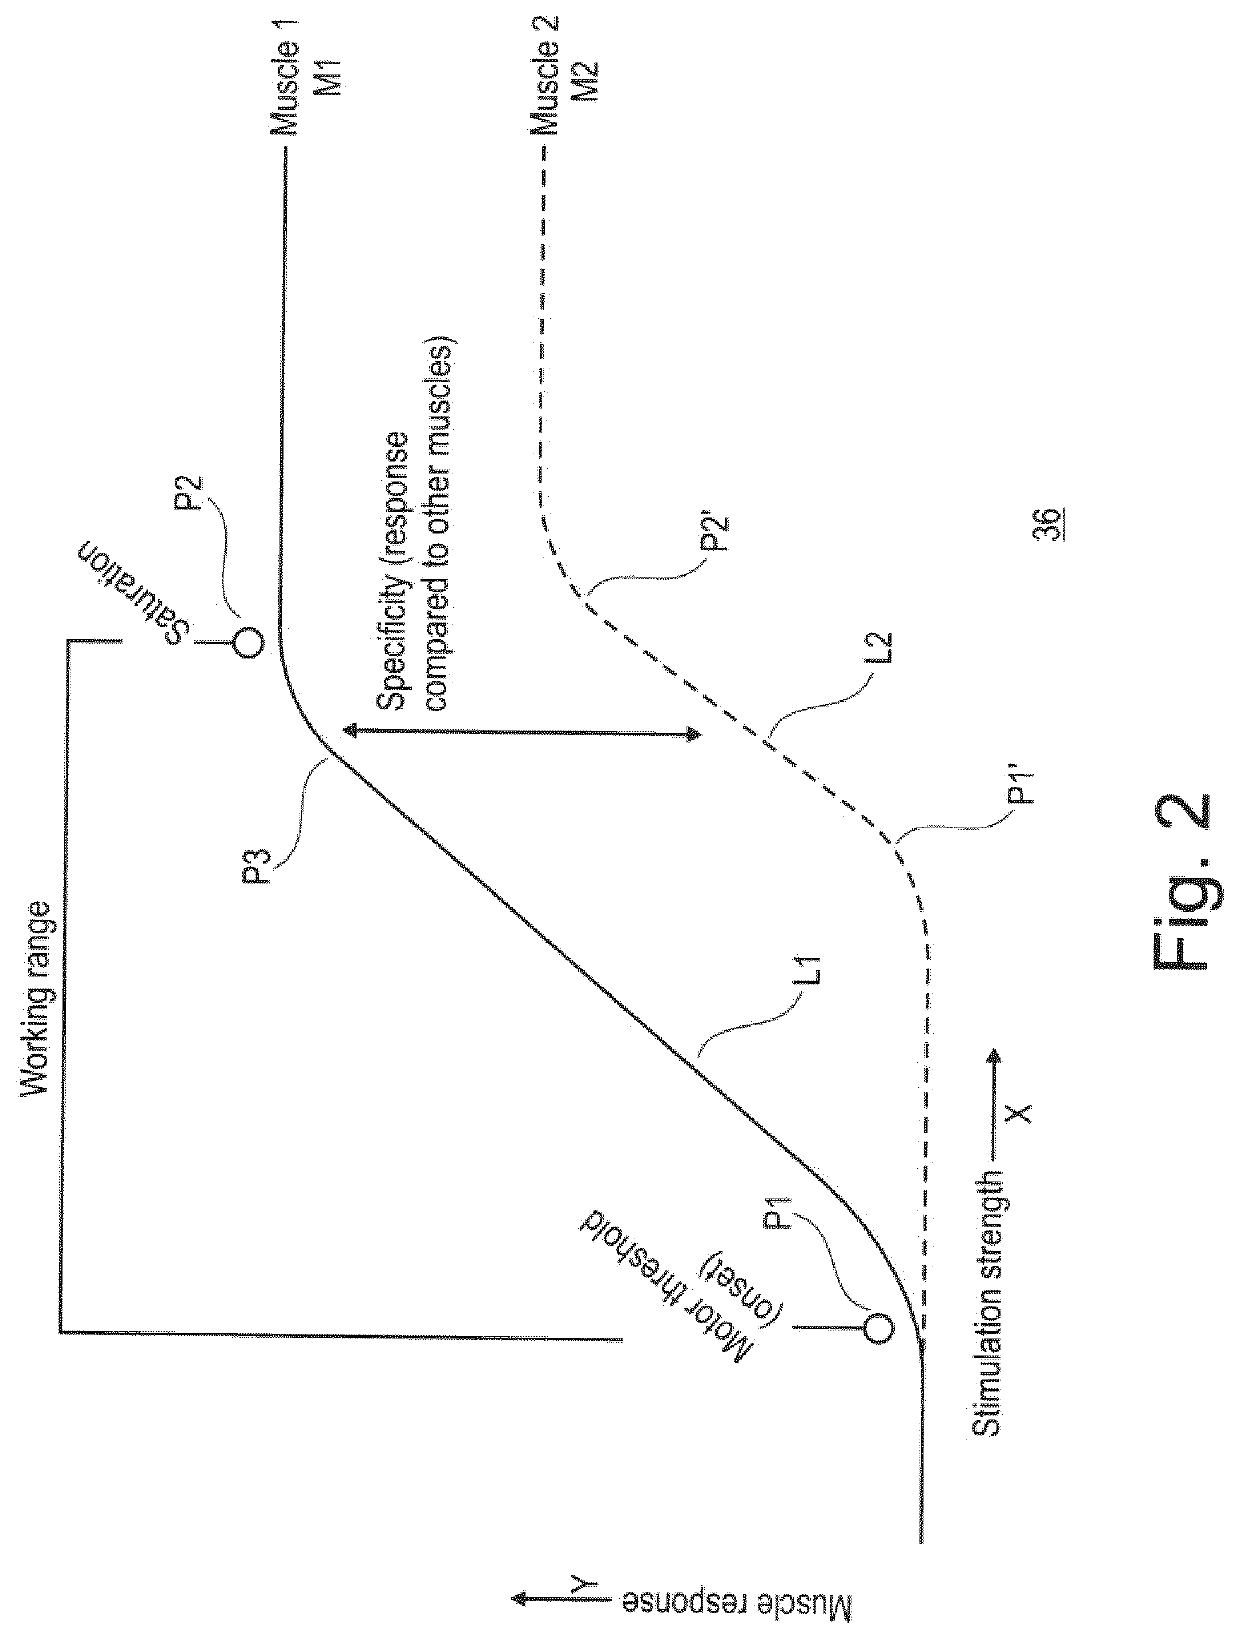 System for planning and/or providing neuromodulation